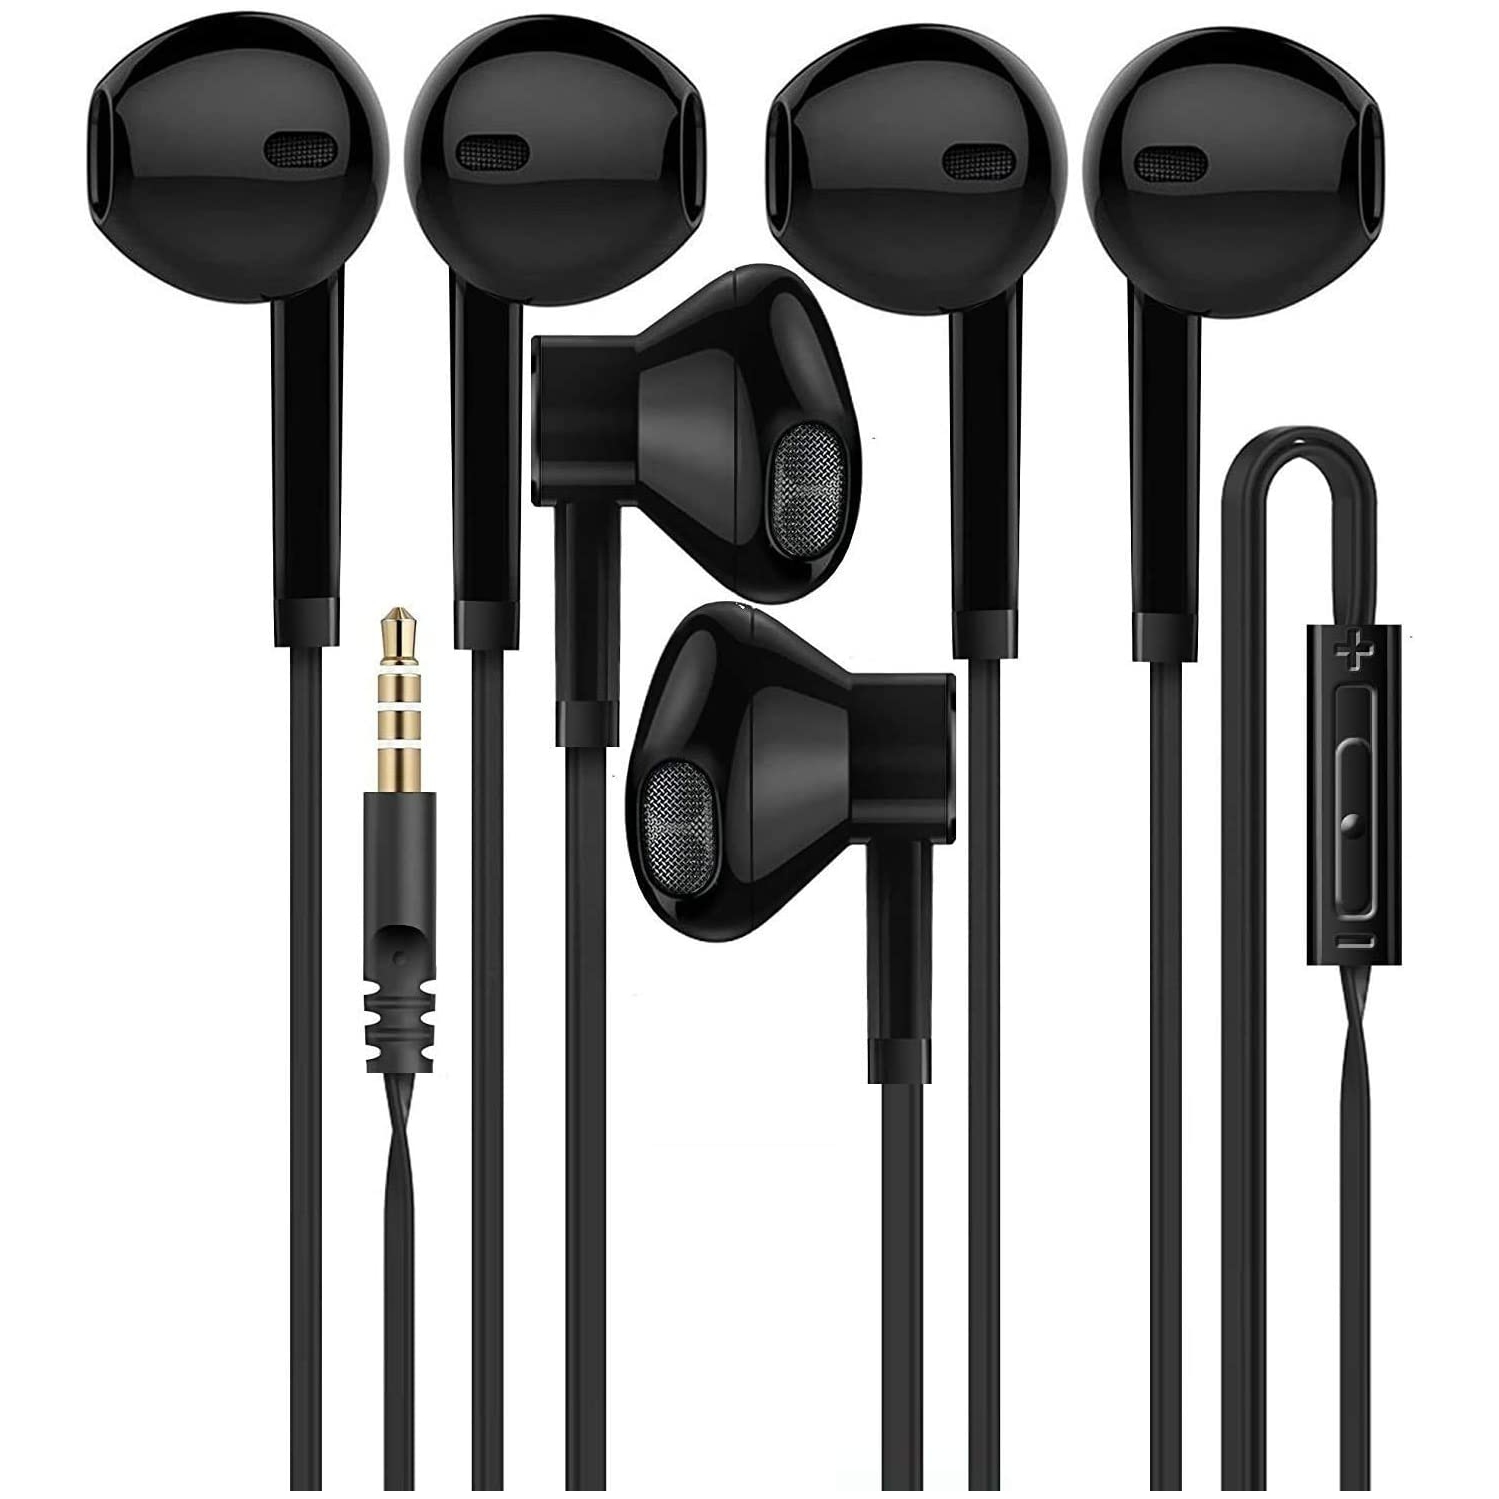 Dolaer Headphones [3-Pack] Certified In-Ear Earbuds Earphones with Microphone Premium HD Stereo and Noise Isolating Headset for Pommes iPhone iPod iPad Samsung Galaxy LG HTC, 3.5MM